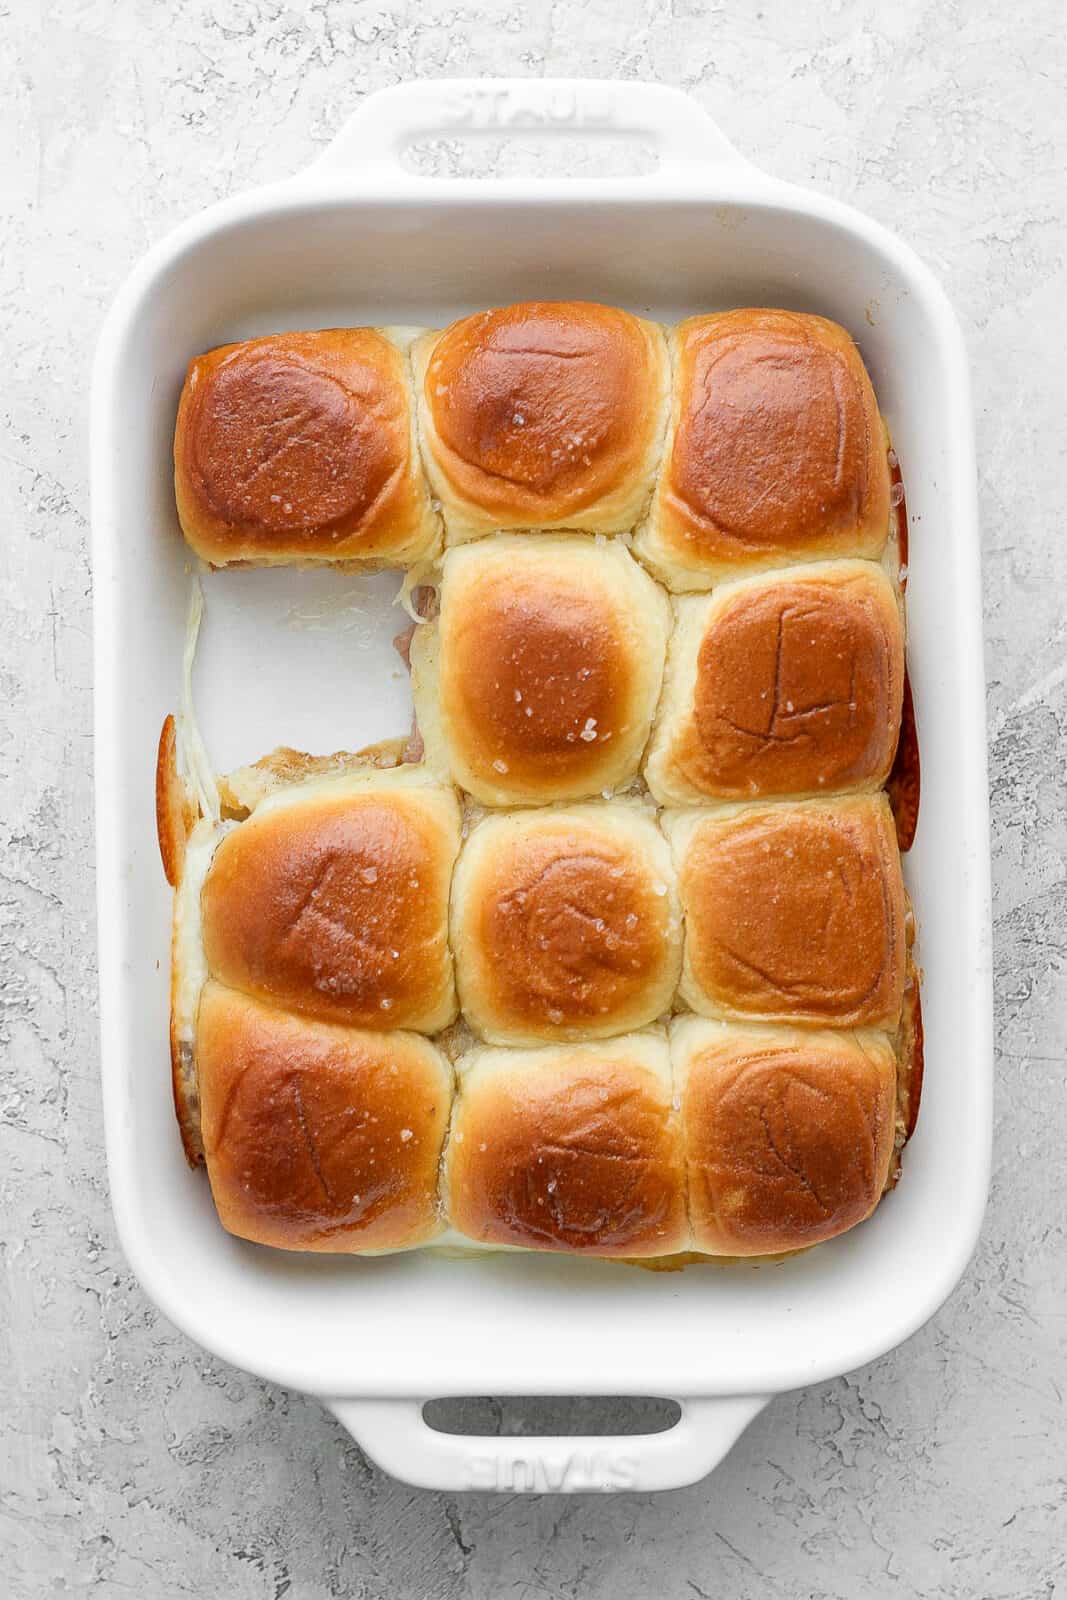 The dish of sliders with one slider missing.